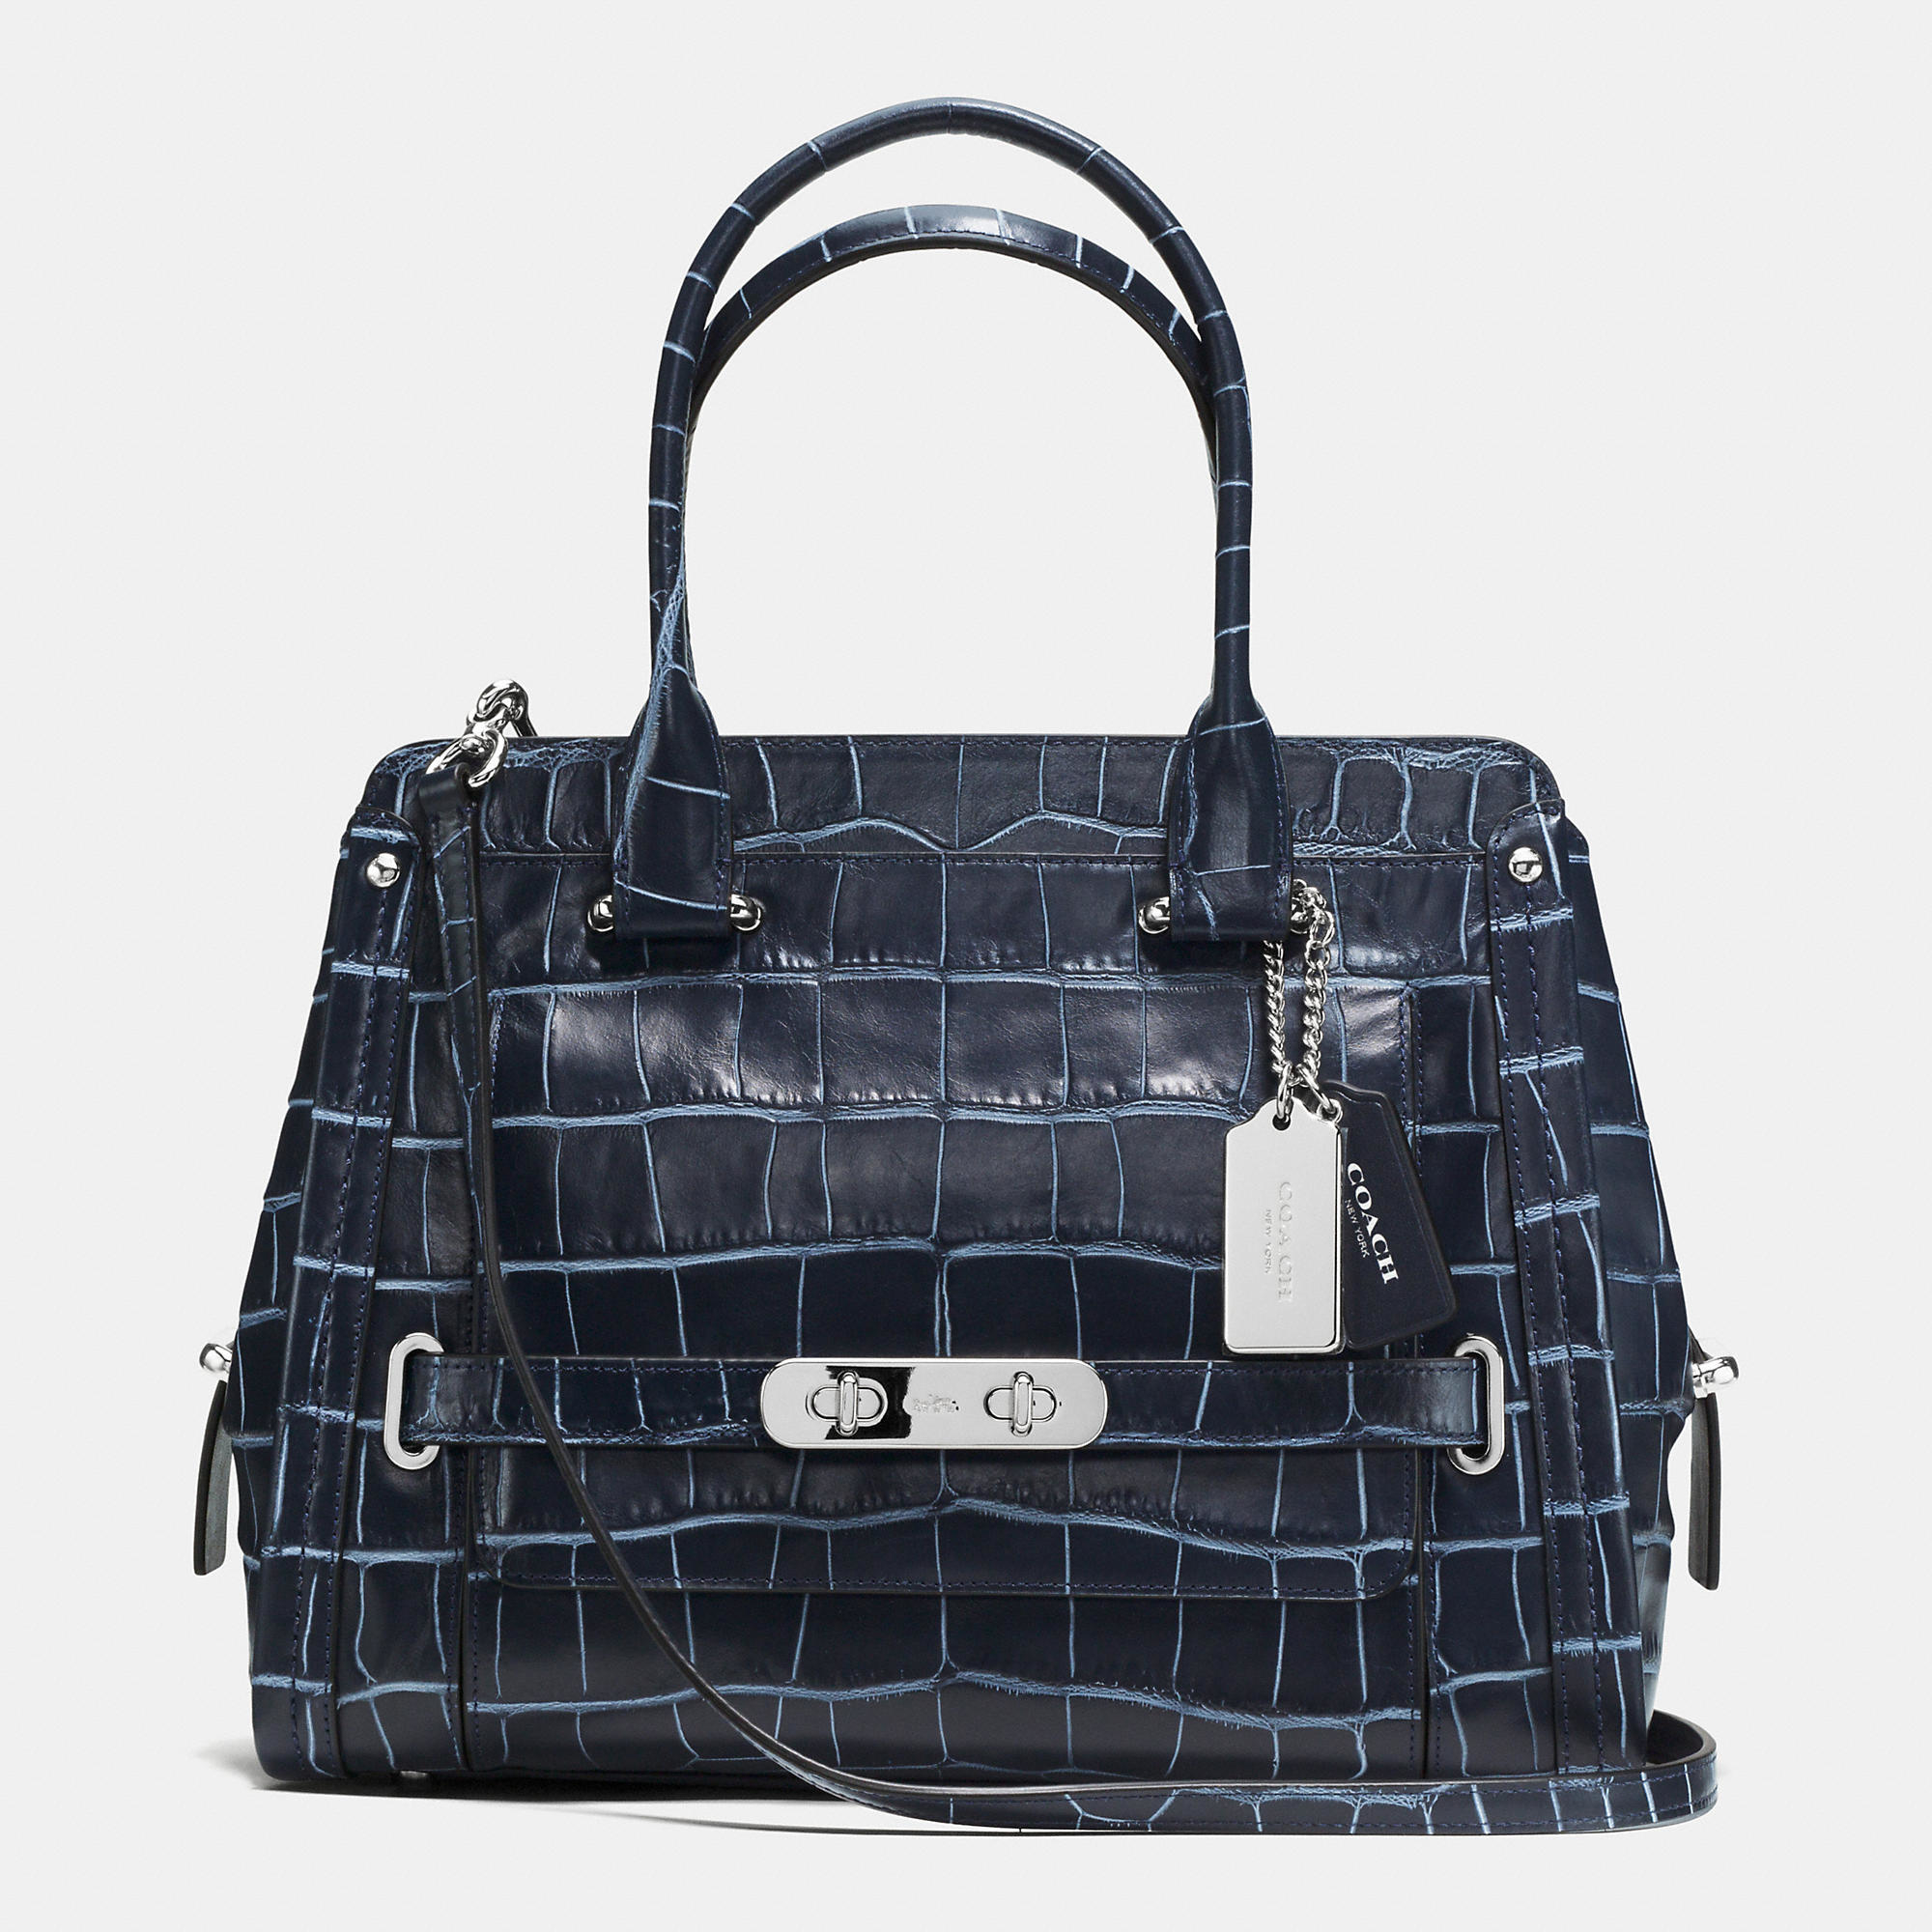 Lyst - Coach Swagger Frame Satchel In Denim Croc Embossed Leather in Blue